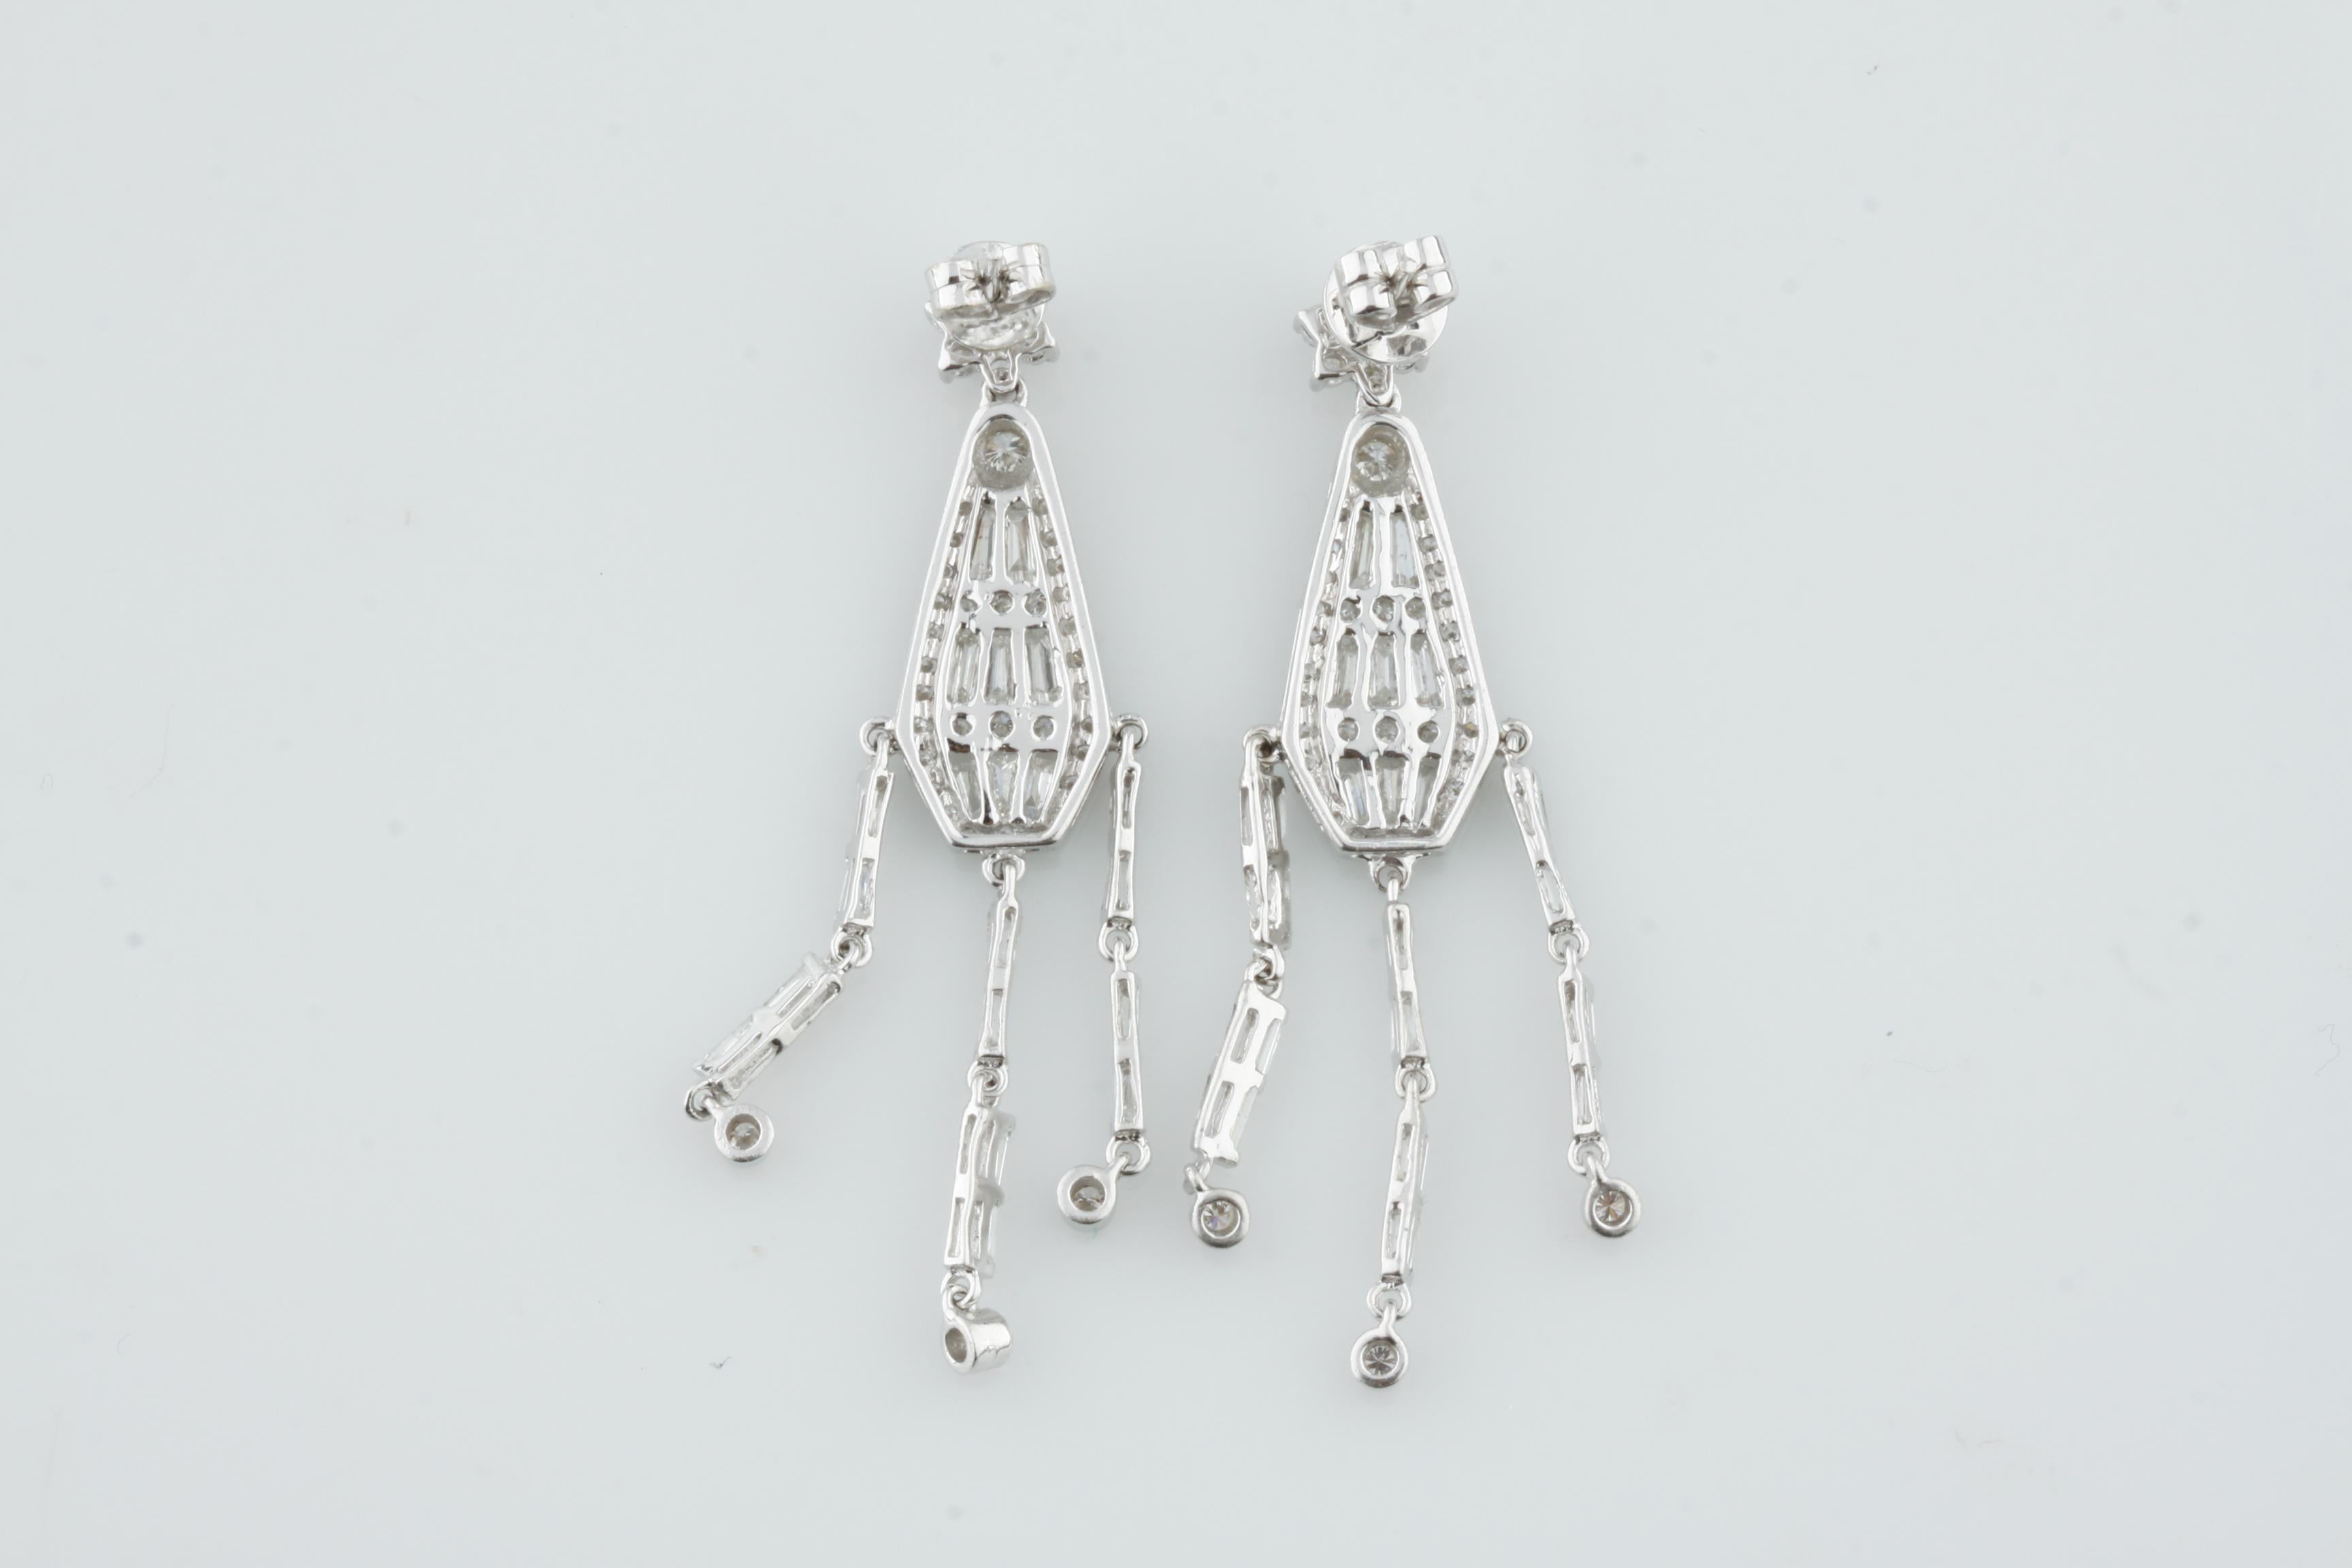 Gorgeous White Gold Diamond Chandelier Earrings
Feature Three Dangling Elements with Baguette Stones
Diamond Floret Post with Butterfly Back
Includes AIG Appraisal Certificate, which reads:
One pair electronically tested 14KT white gold ladies cast